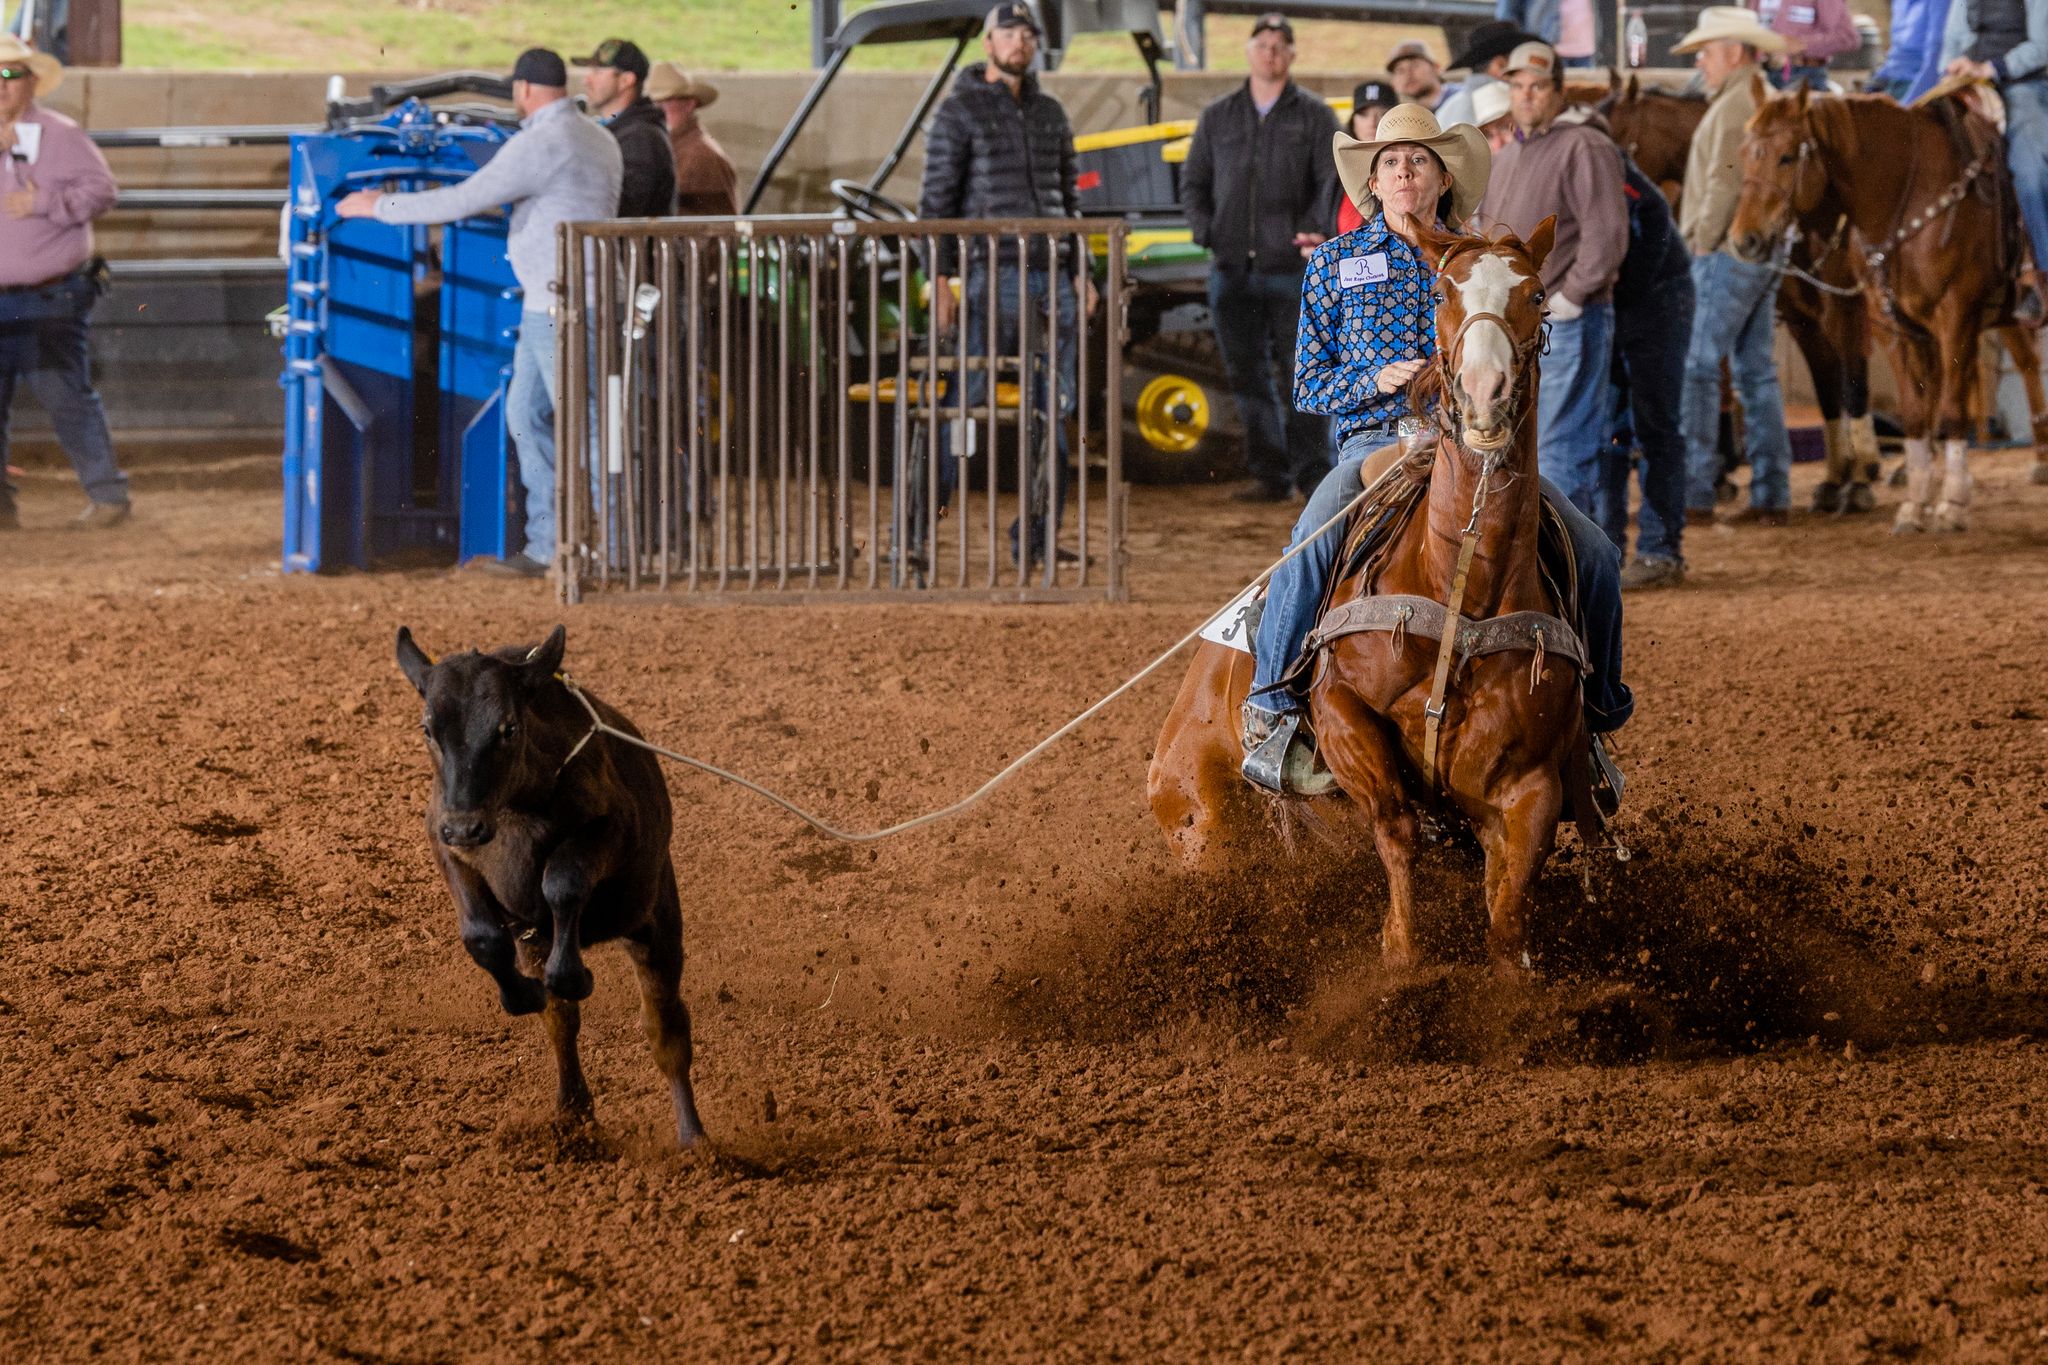 Tauna Alcorn stops her horse after catching a calf in the breakaway roping.